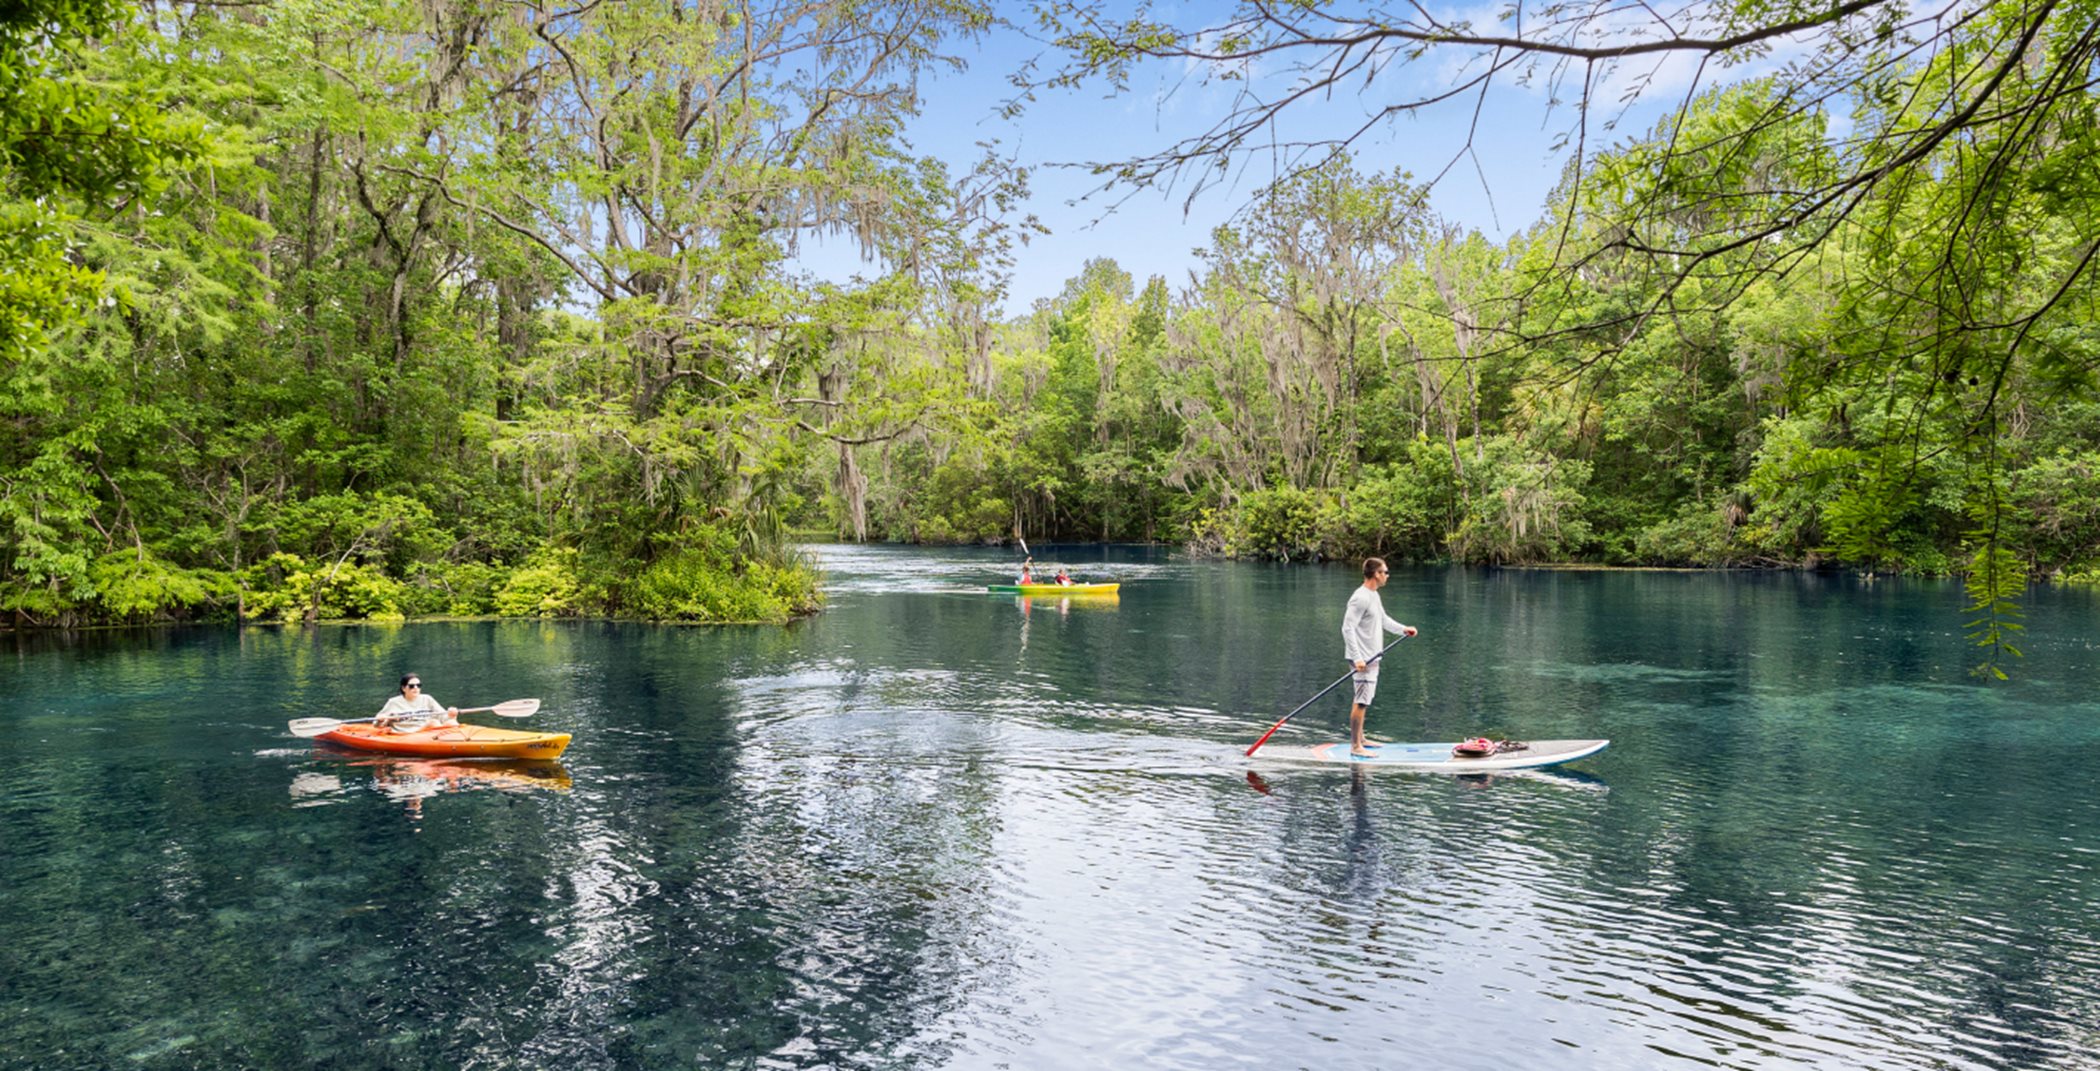 Stand-up paddle boarders and Kayakers in Silver Springs State Recreation Area